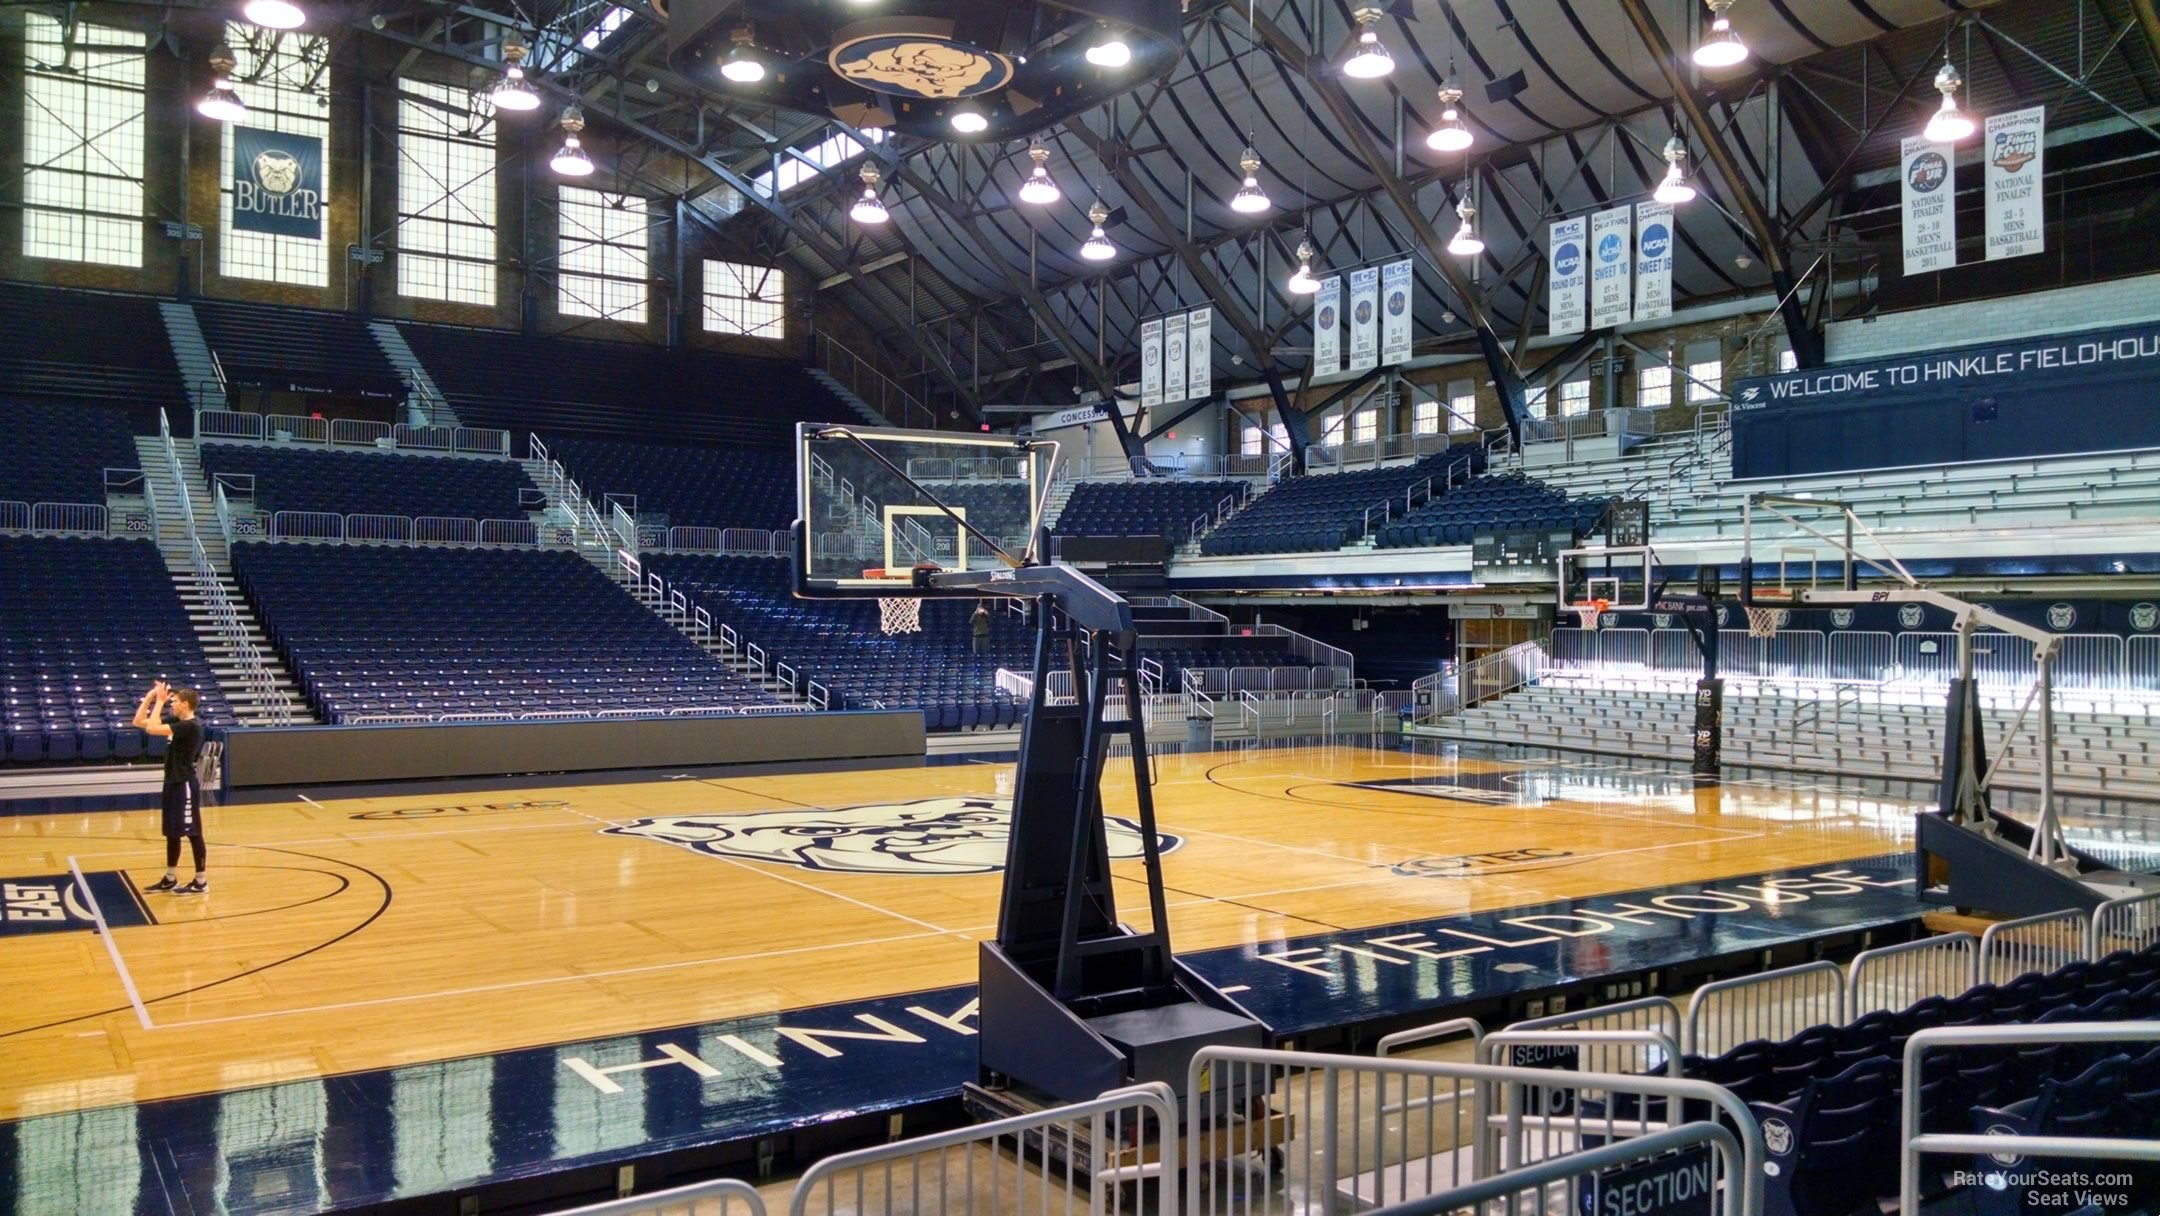 section 119, row 7 seat view  - hinkle fieldhouse